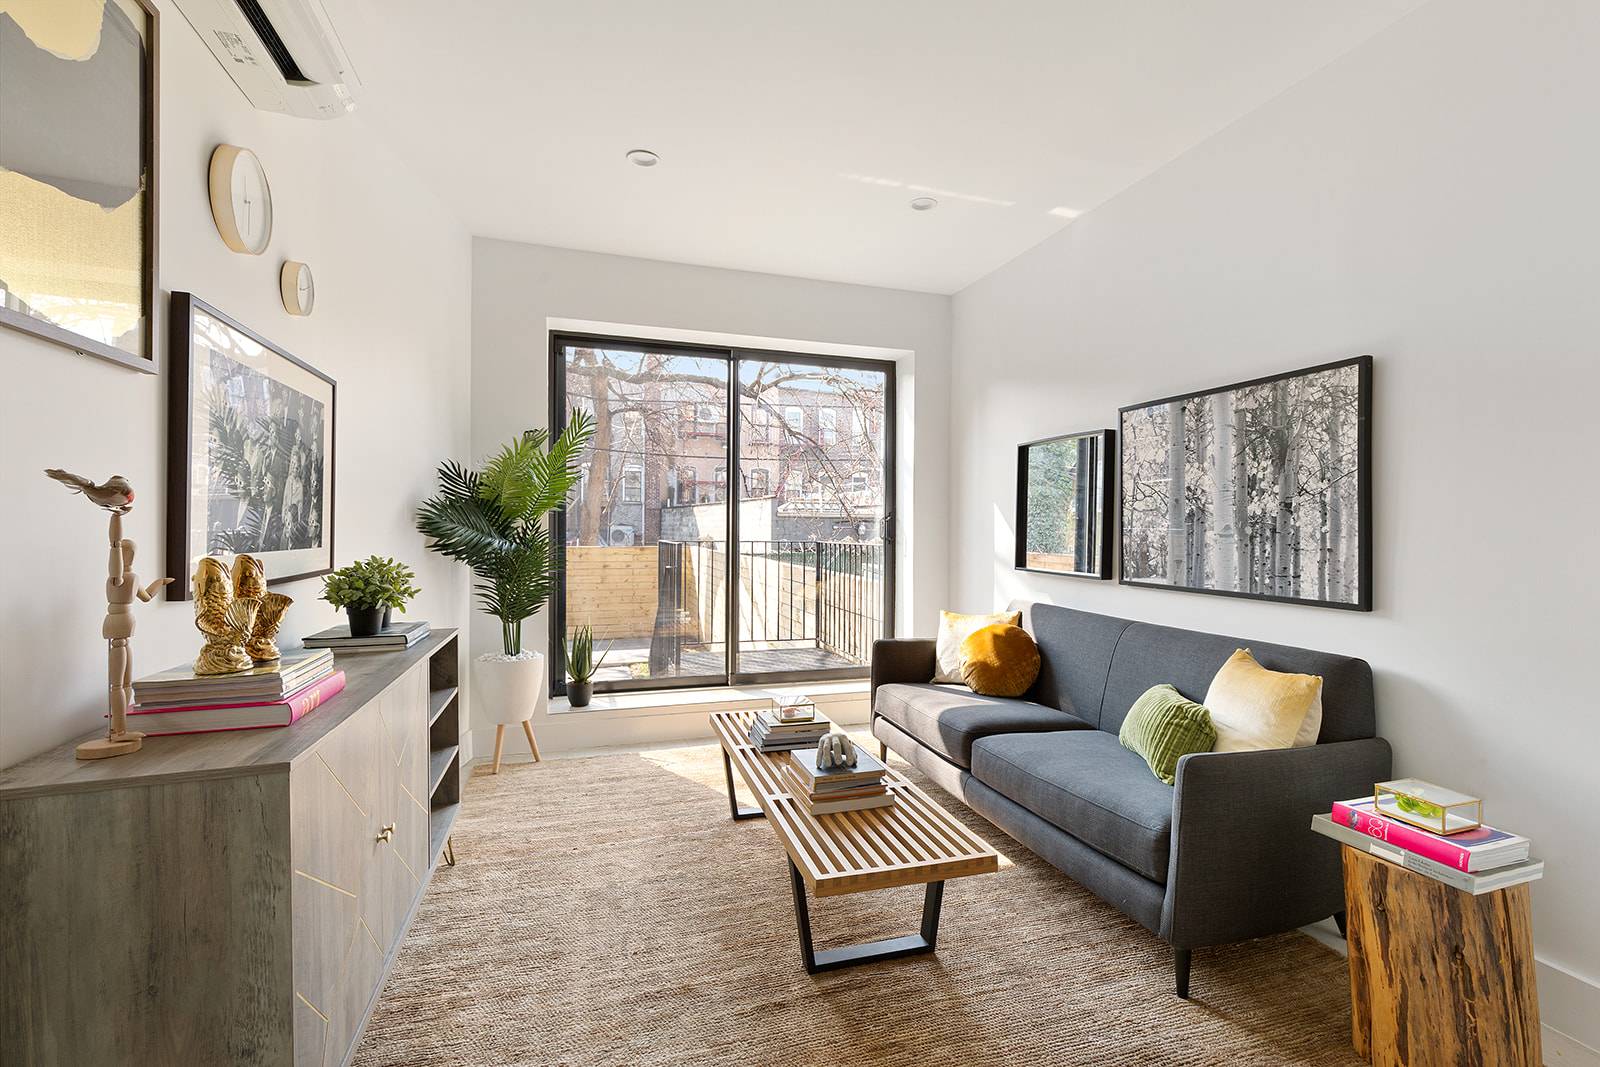 On a quiet residential street at the nexus of Prospect Lefferts Gardens and Prospect Park South lies the beautifully restored and expanded 54 Martense Street.